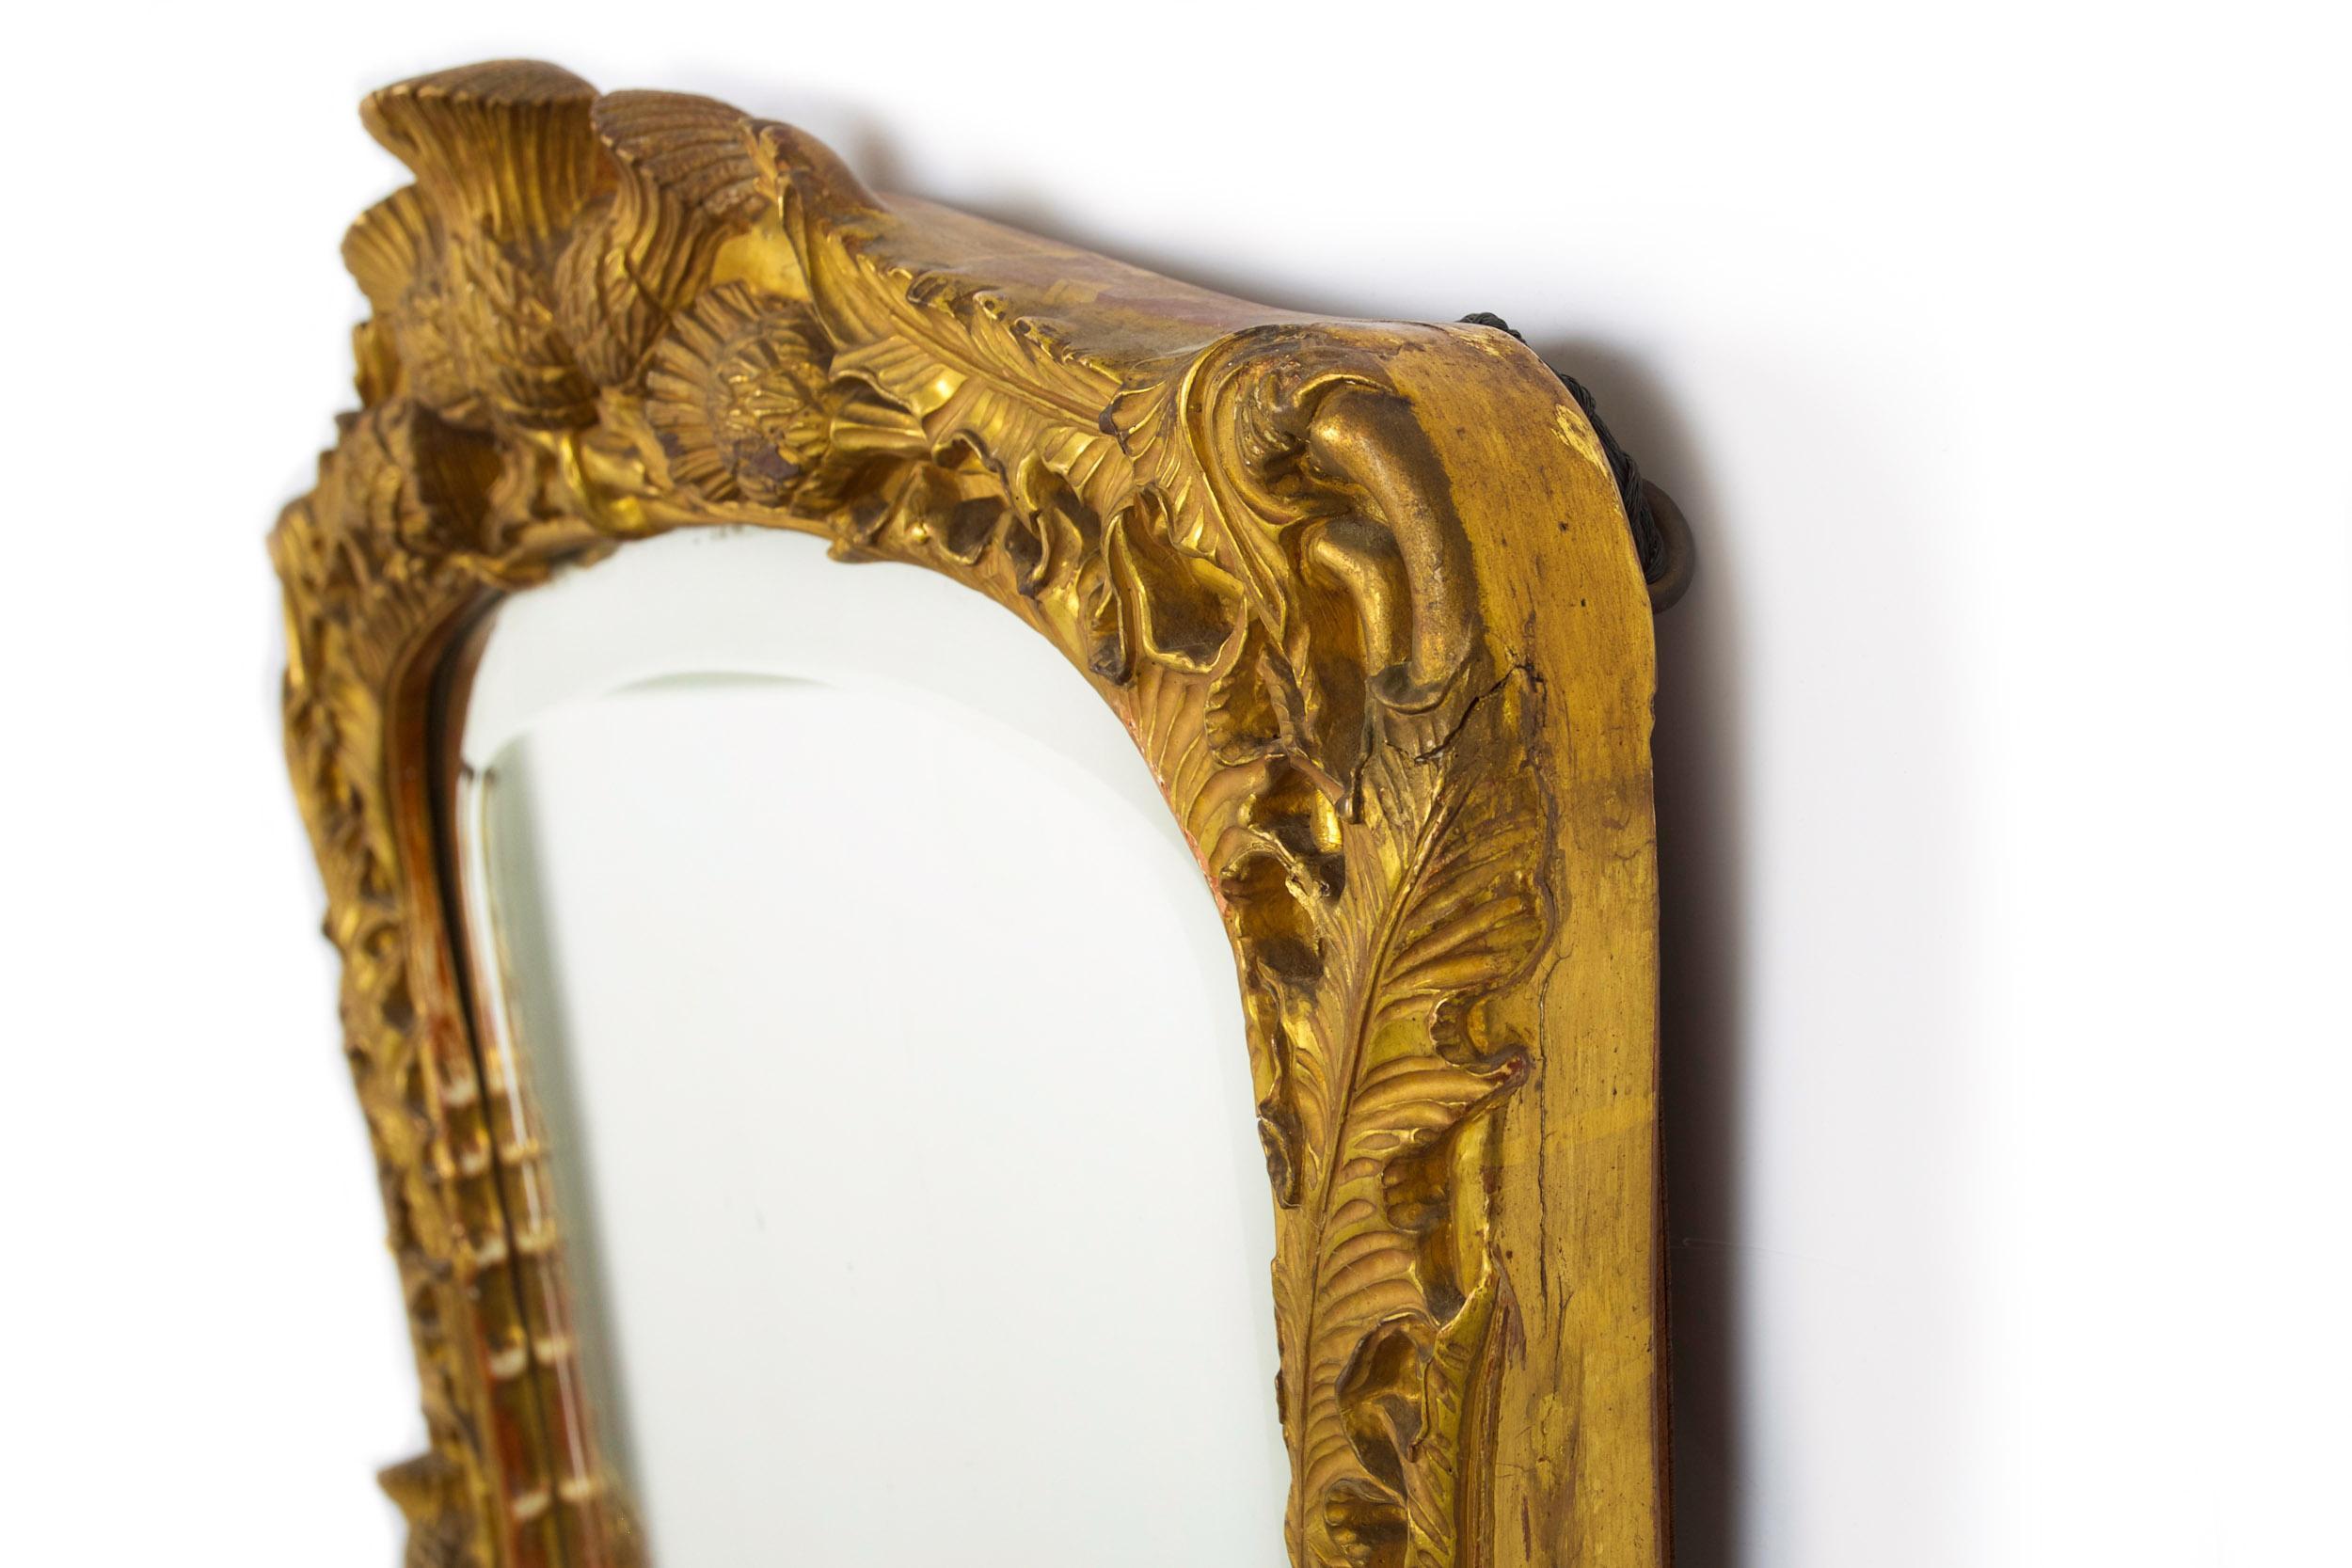 British 19th Century Thistle-Carved Giltwood Mirror, Probably Scottish